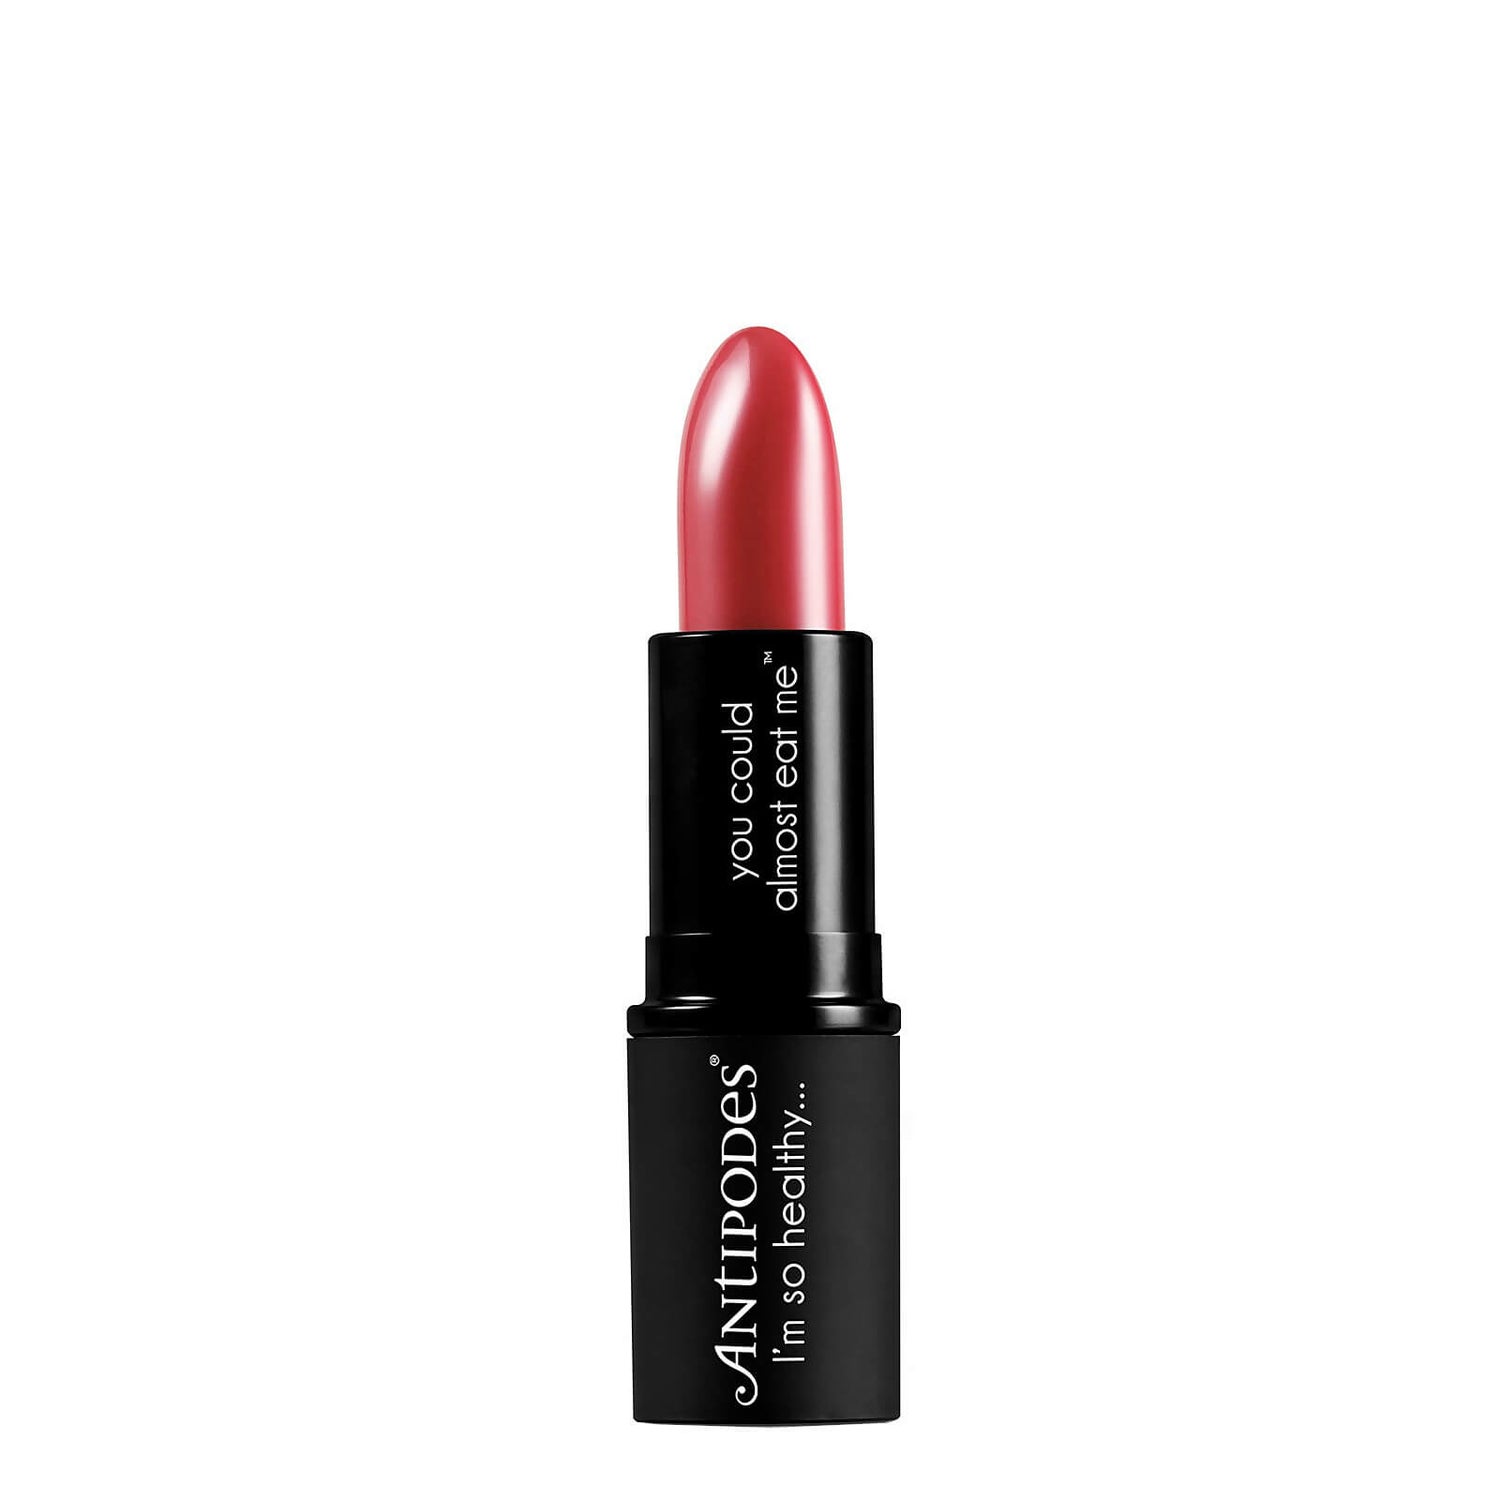 Antipodes Lipstick 4g - Remarkably Red